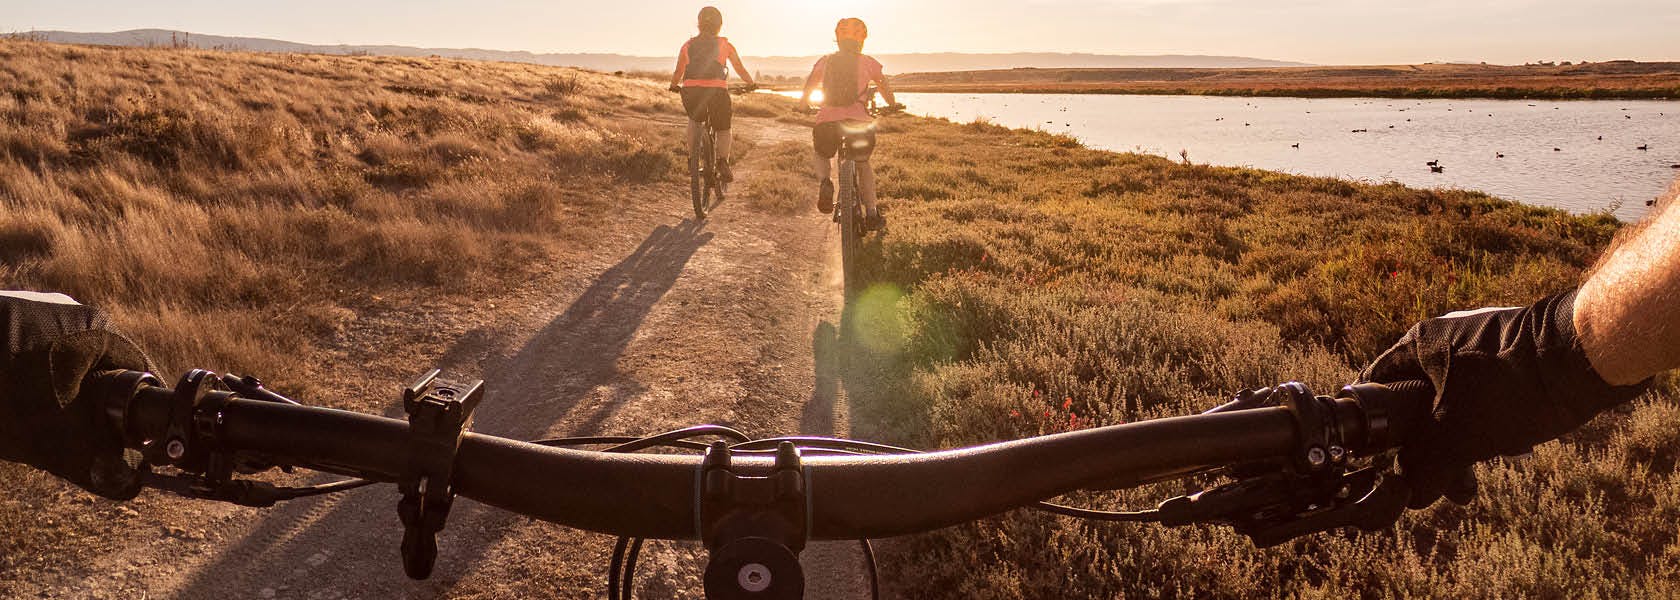 POV shot of cyclists handlebars on a path at sunset with two cyclists in front